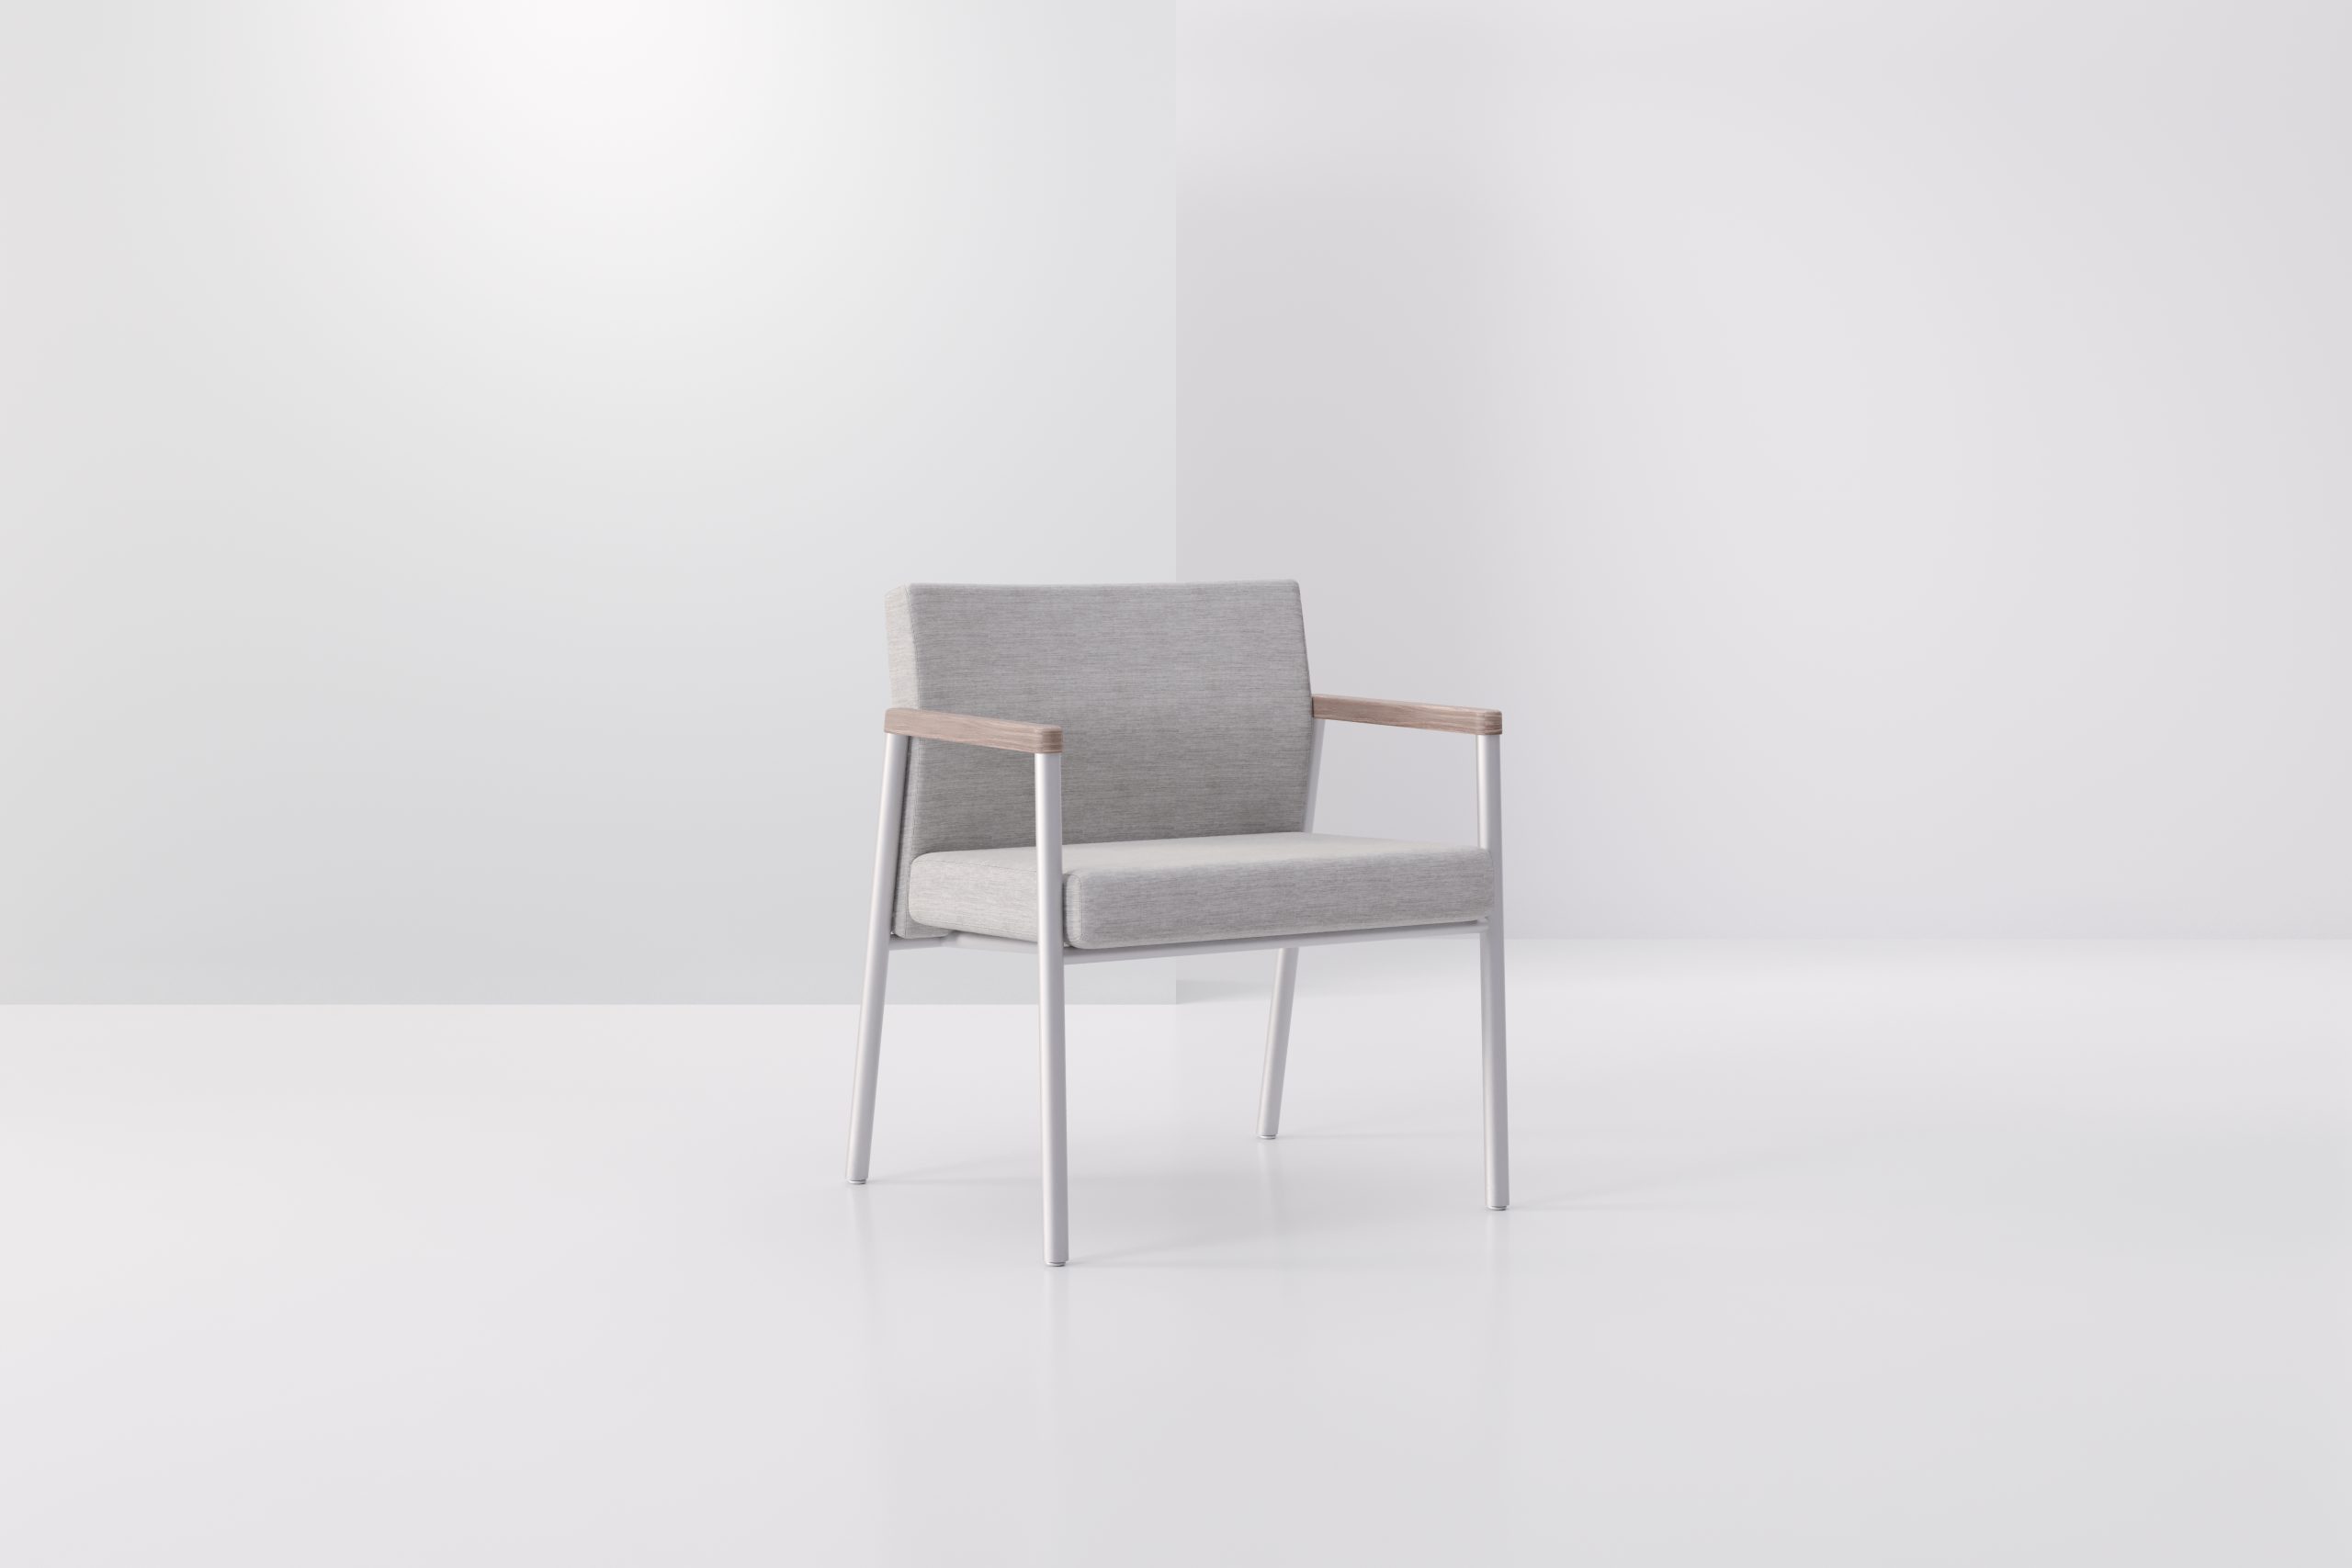 Altos 24 Chair Product Image 1